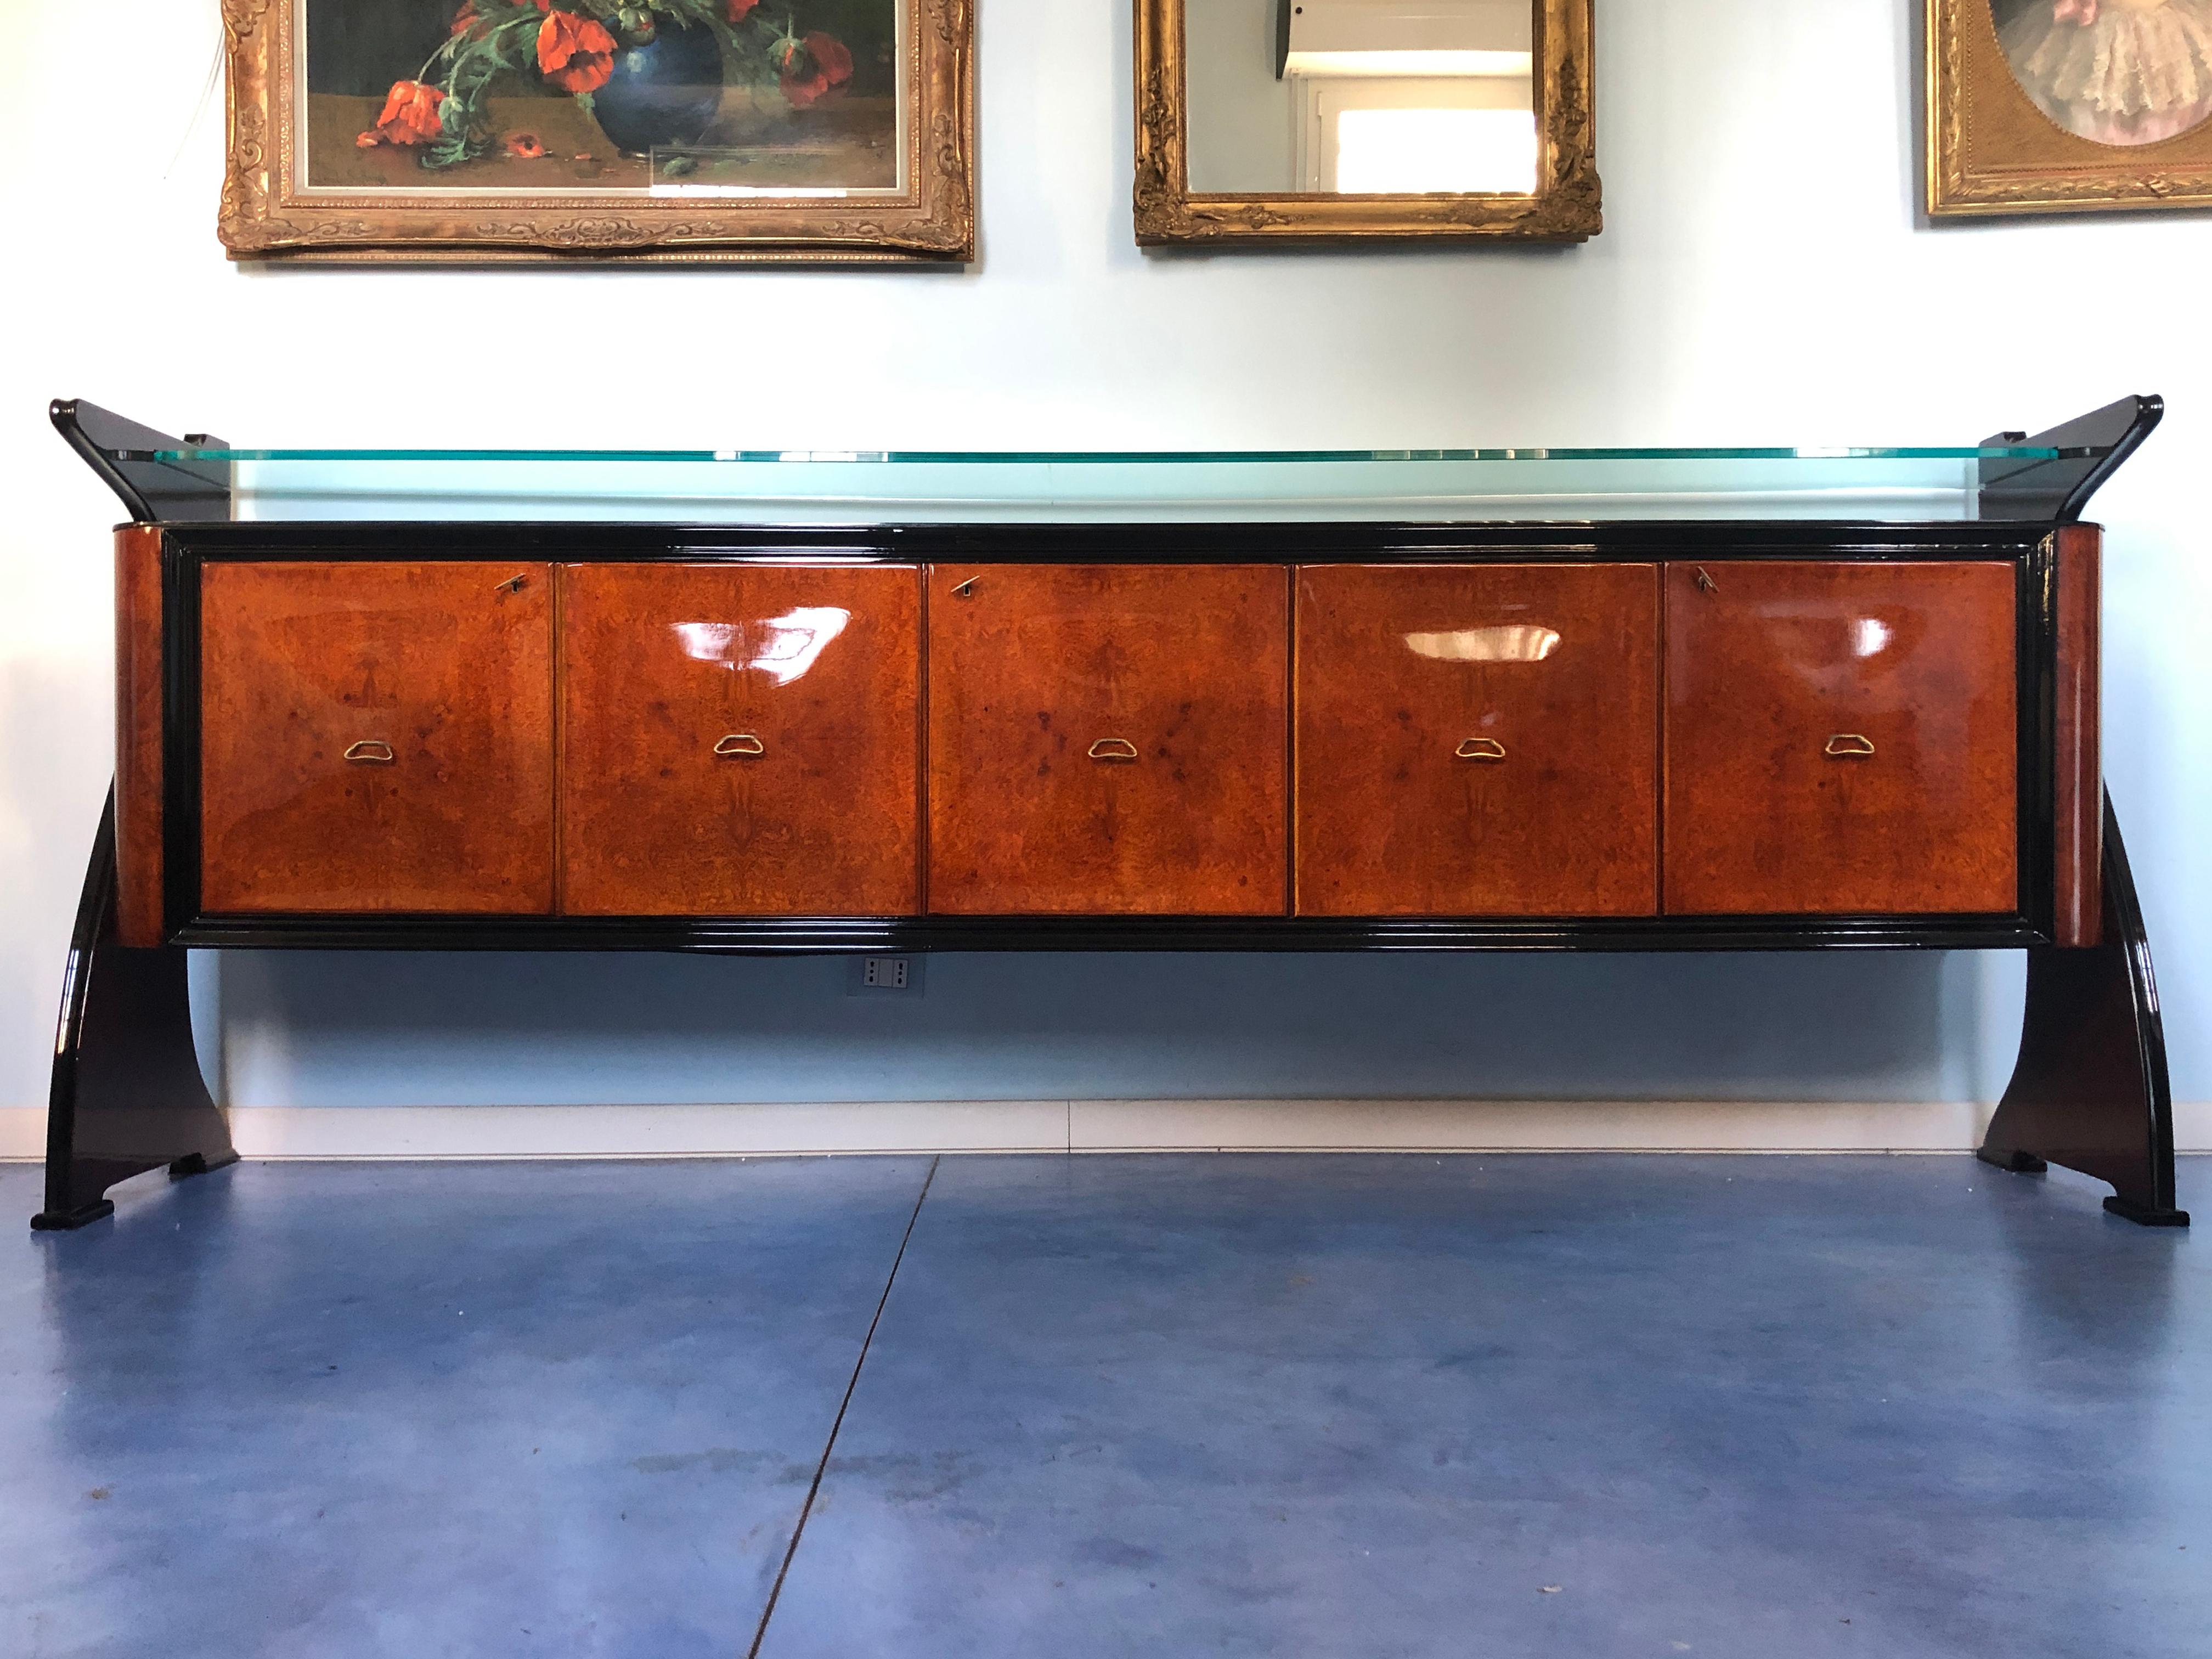 Fine Italian sideboard Guglielmo Ulrich's style.
Amboyna and rosewood, stunning line sides, rare black opaline glass top, ebonized details and mahogany interiors.
Recently restored and ready to use.

If requested, we'll provide the CITES